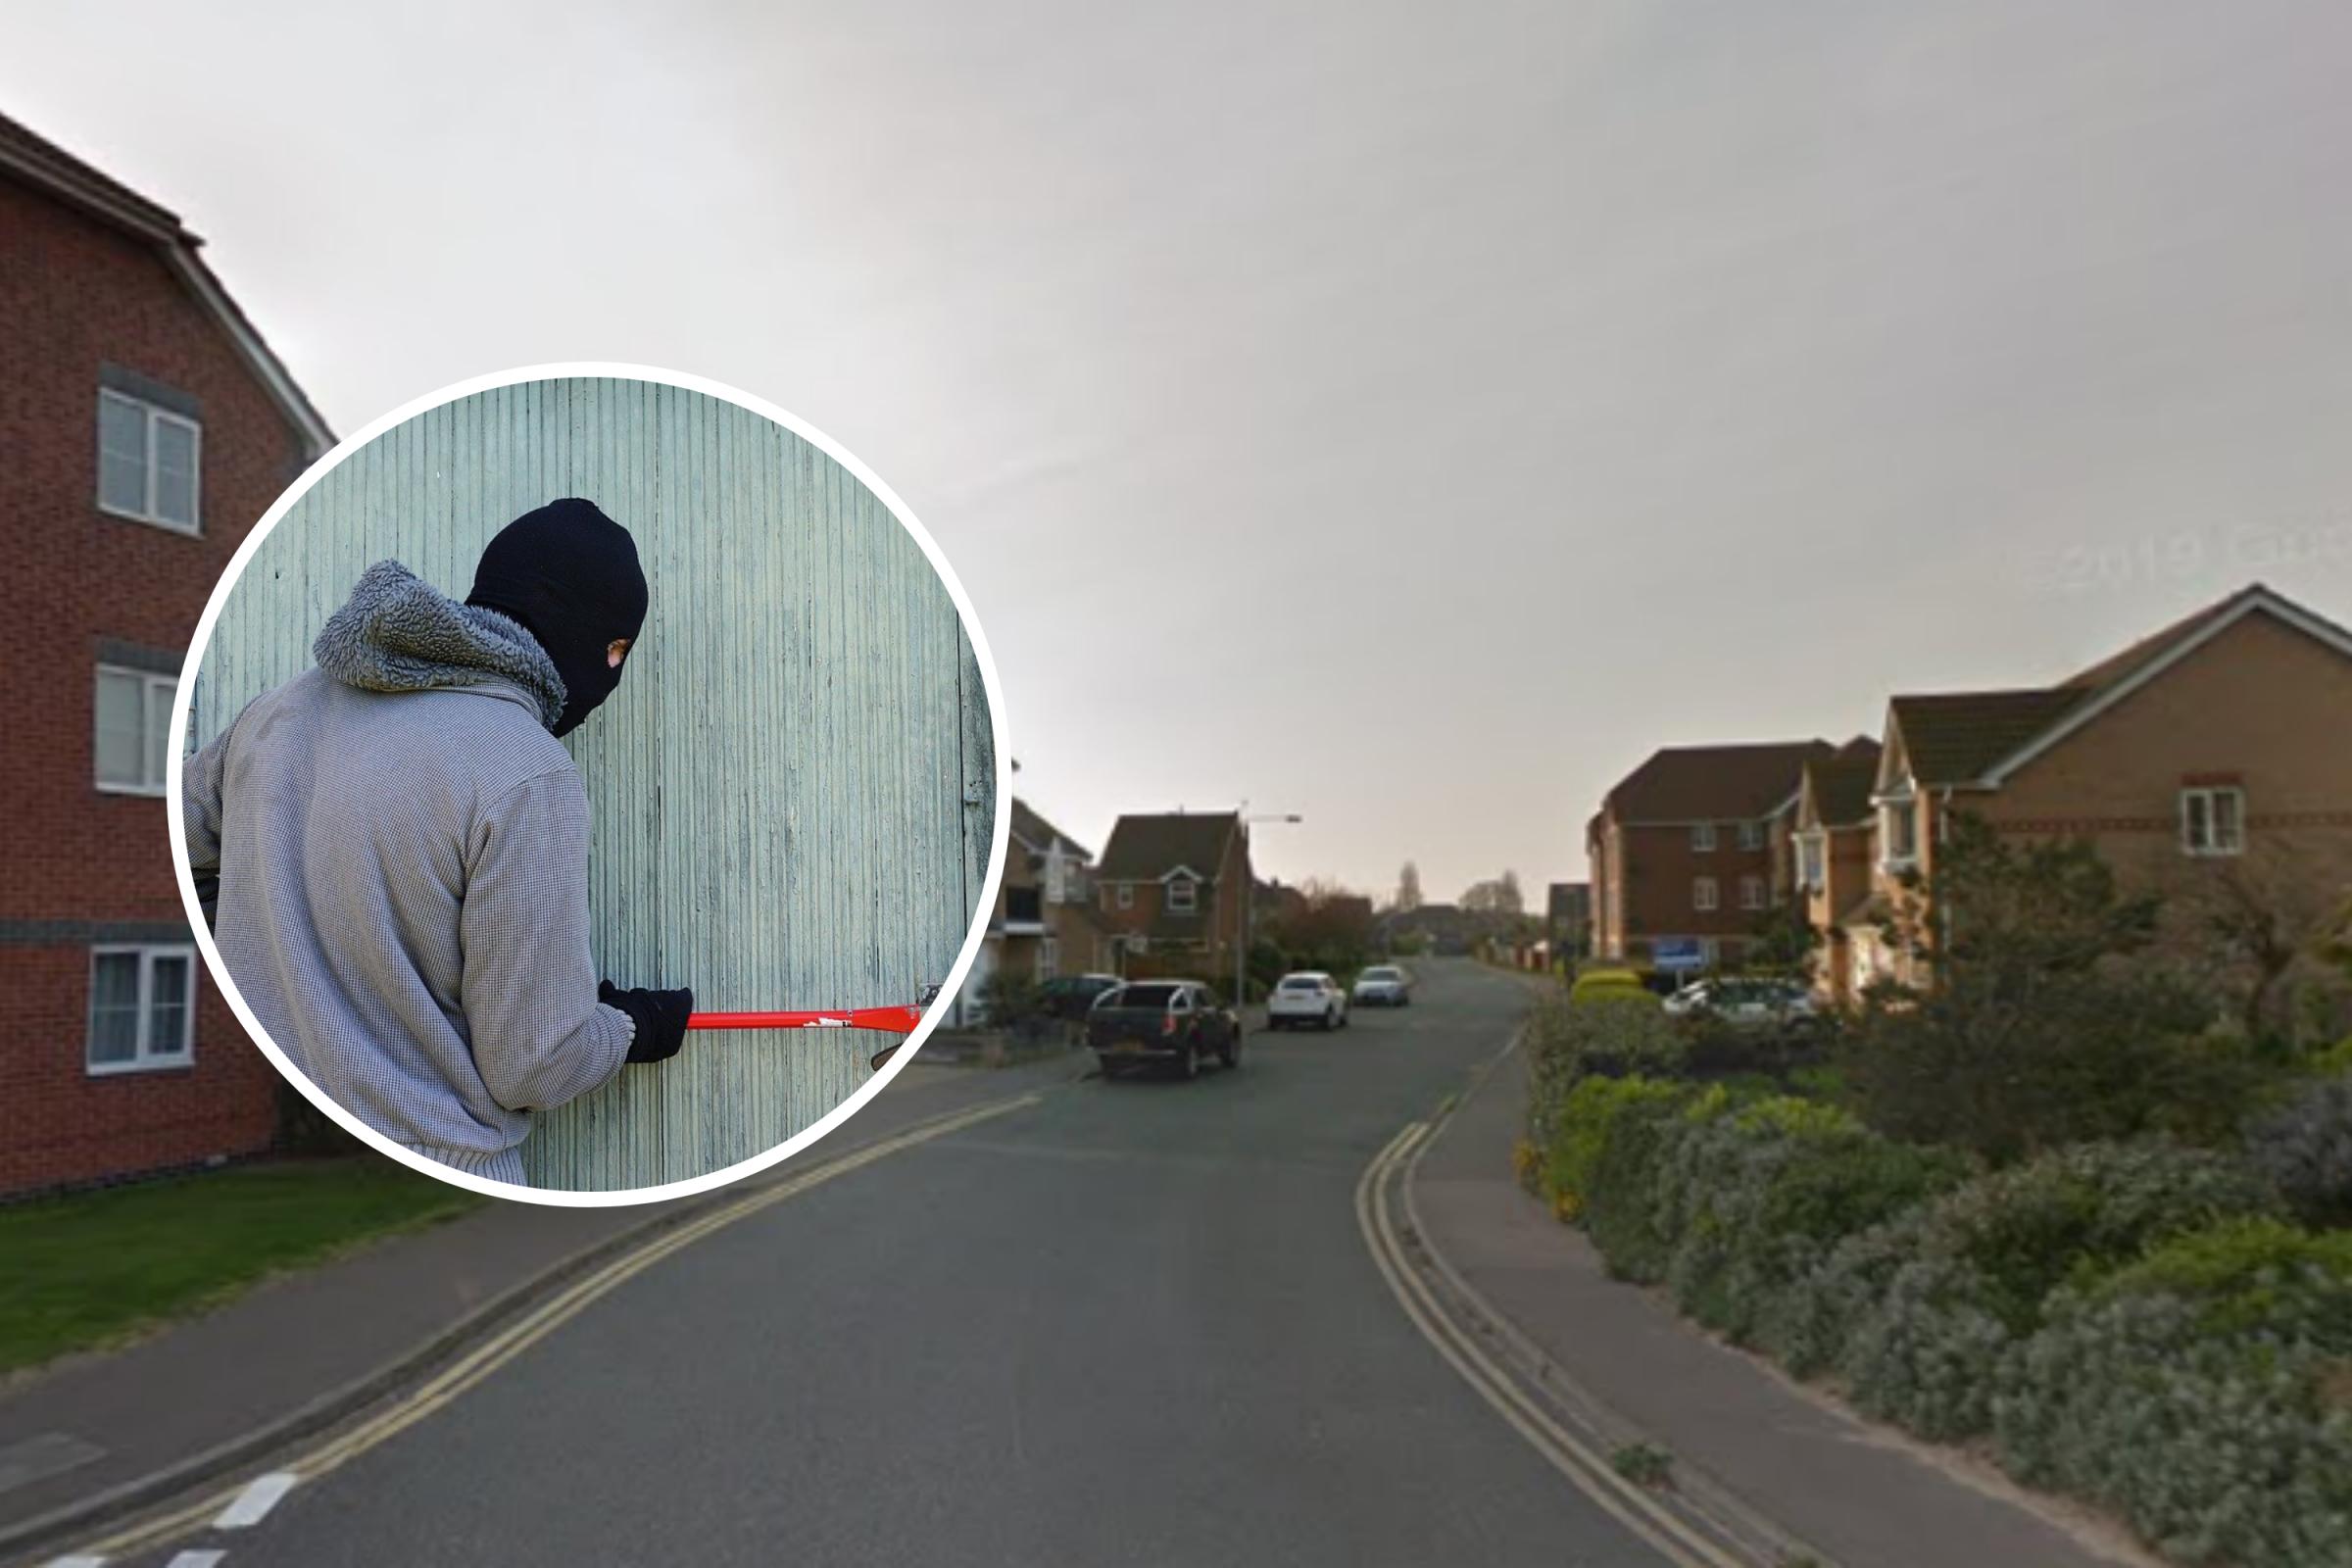 Masked men reportedly seen breaking into Clacton property